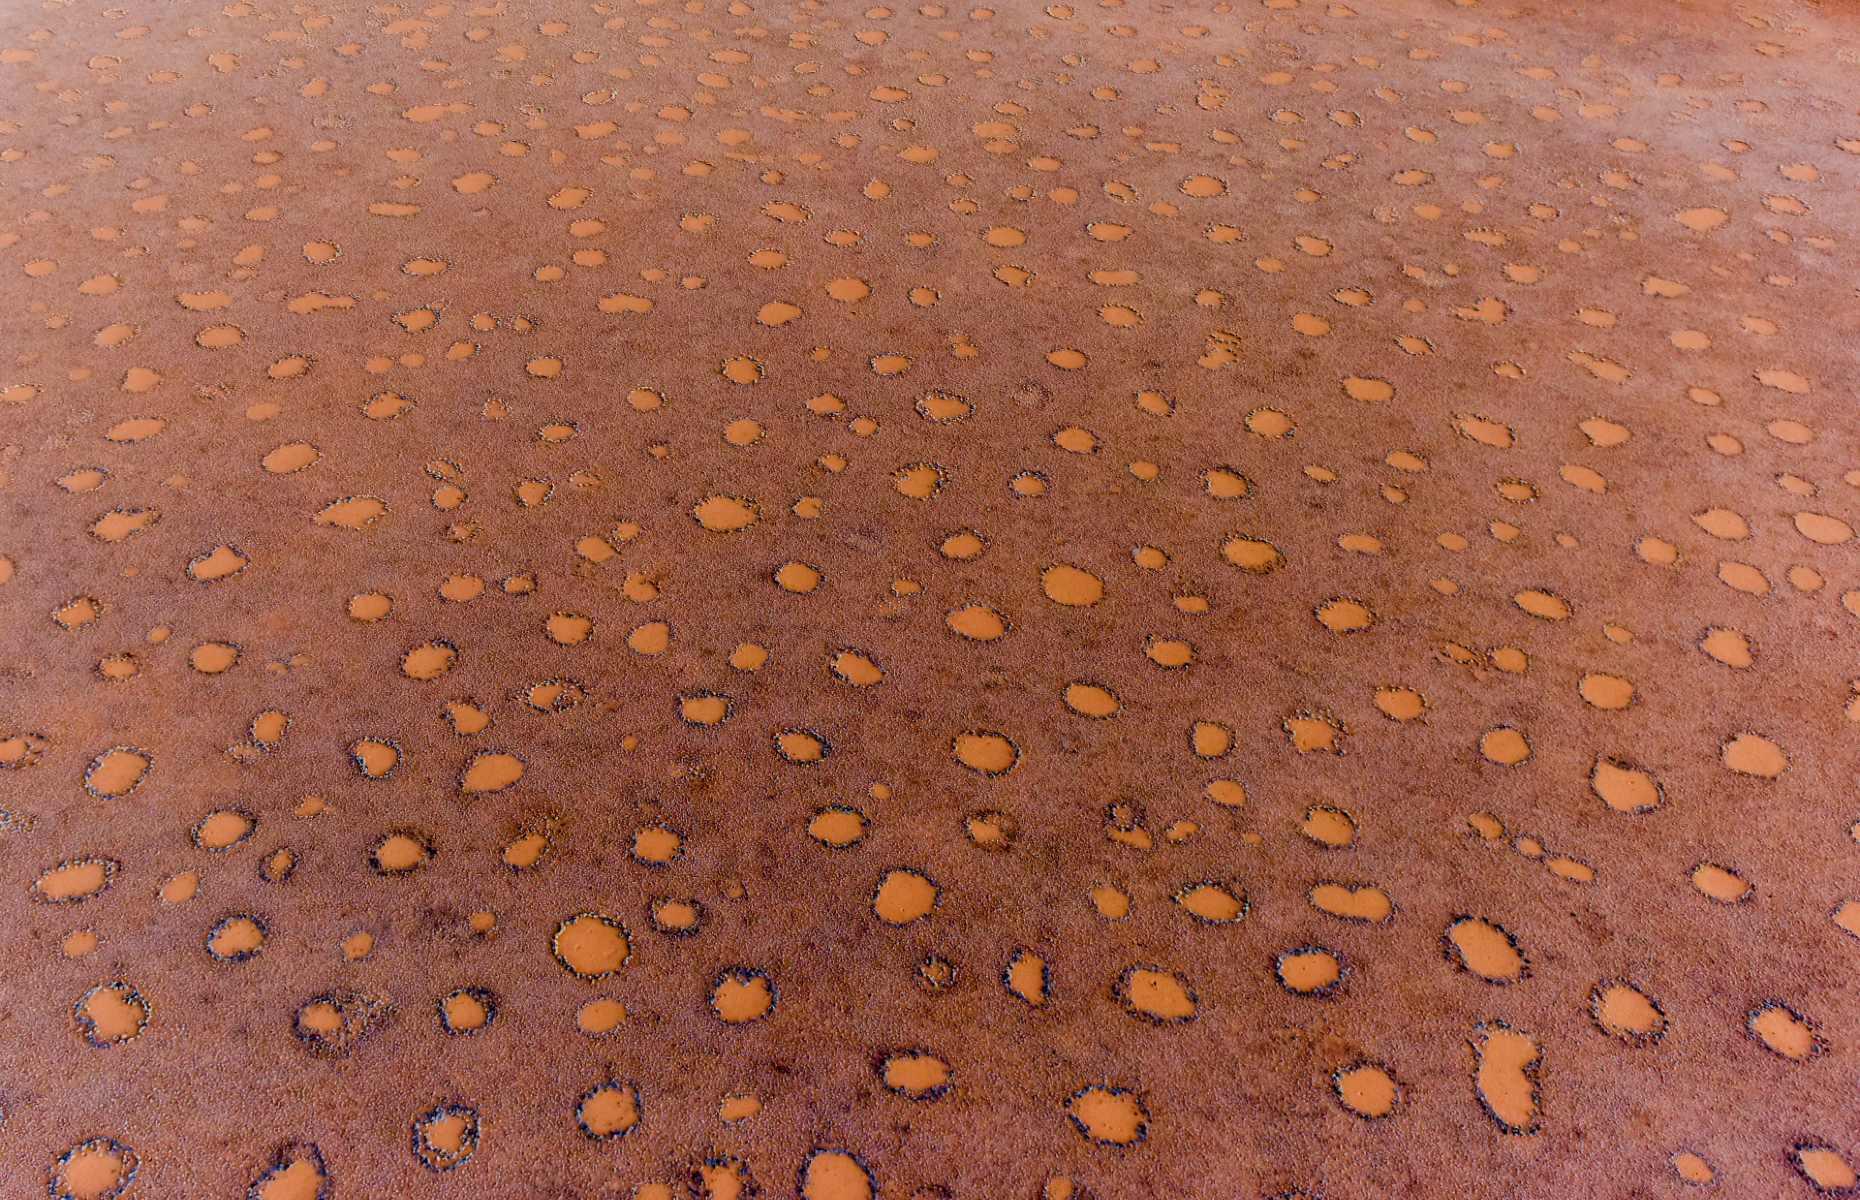 <p>Seen from above, the circular markings on this grassy desert in Namibia look like a vast sheet of polka dots. For hundreds of years, researchers have been unable to determine the cause of the fairy circles, which vary from 10-65 feet (3-20m) in diameter and extend across hundreds of miles. Local folklore states they’re the footprints of gods or that they were created by the breath of an underground dragon. But science has struggled to find a conclusive answer.</p>